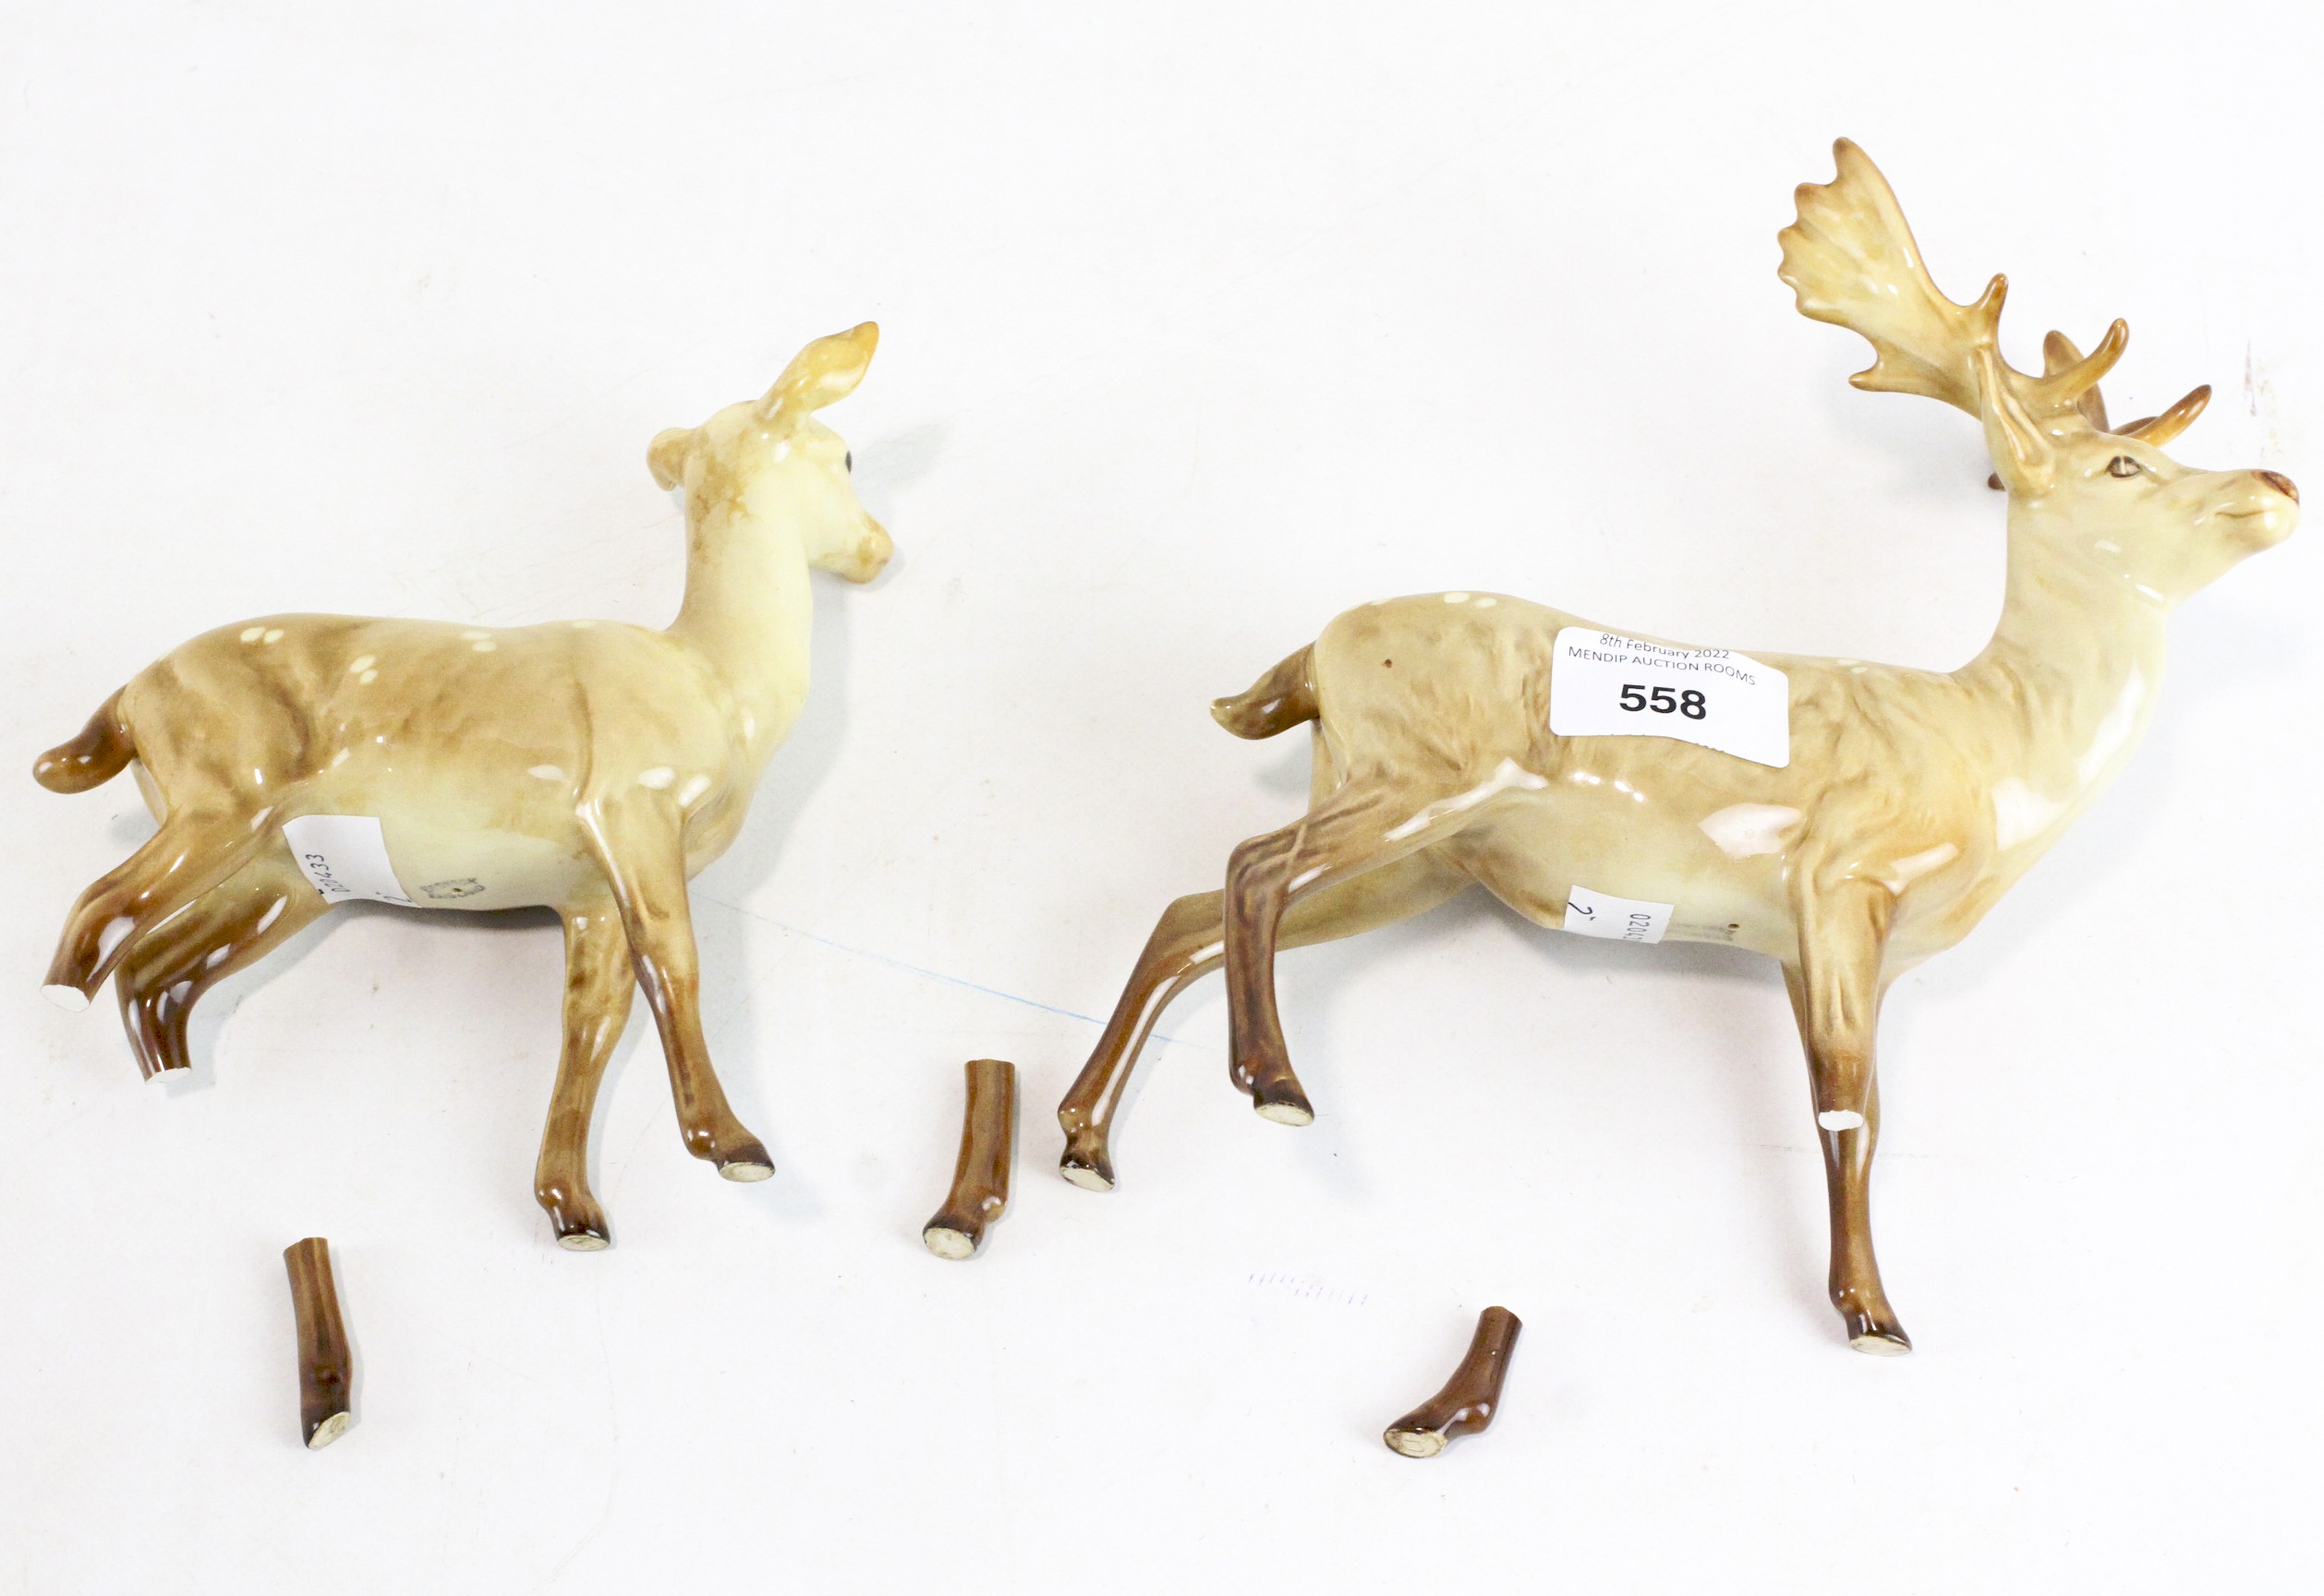 Two Beswick ceramic figures of deer, one being a stag, the other a doe, largest 19.